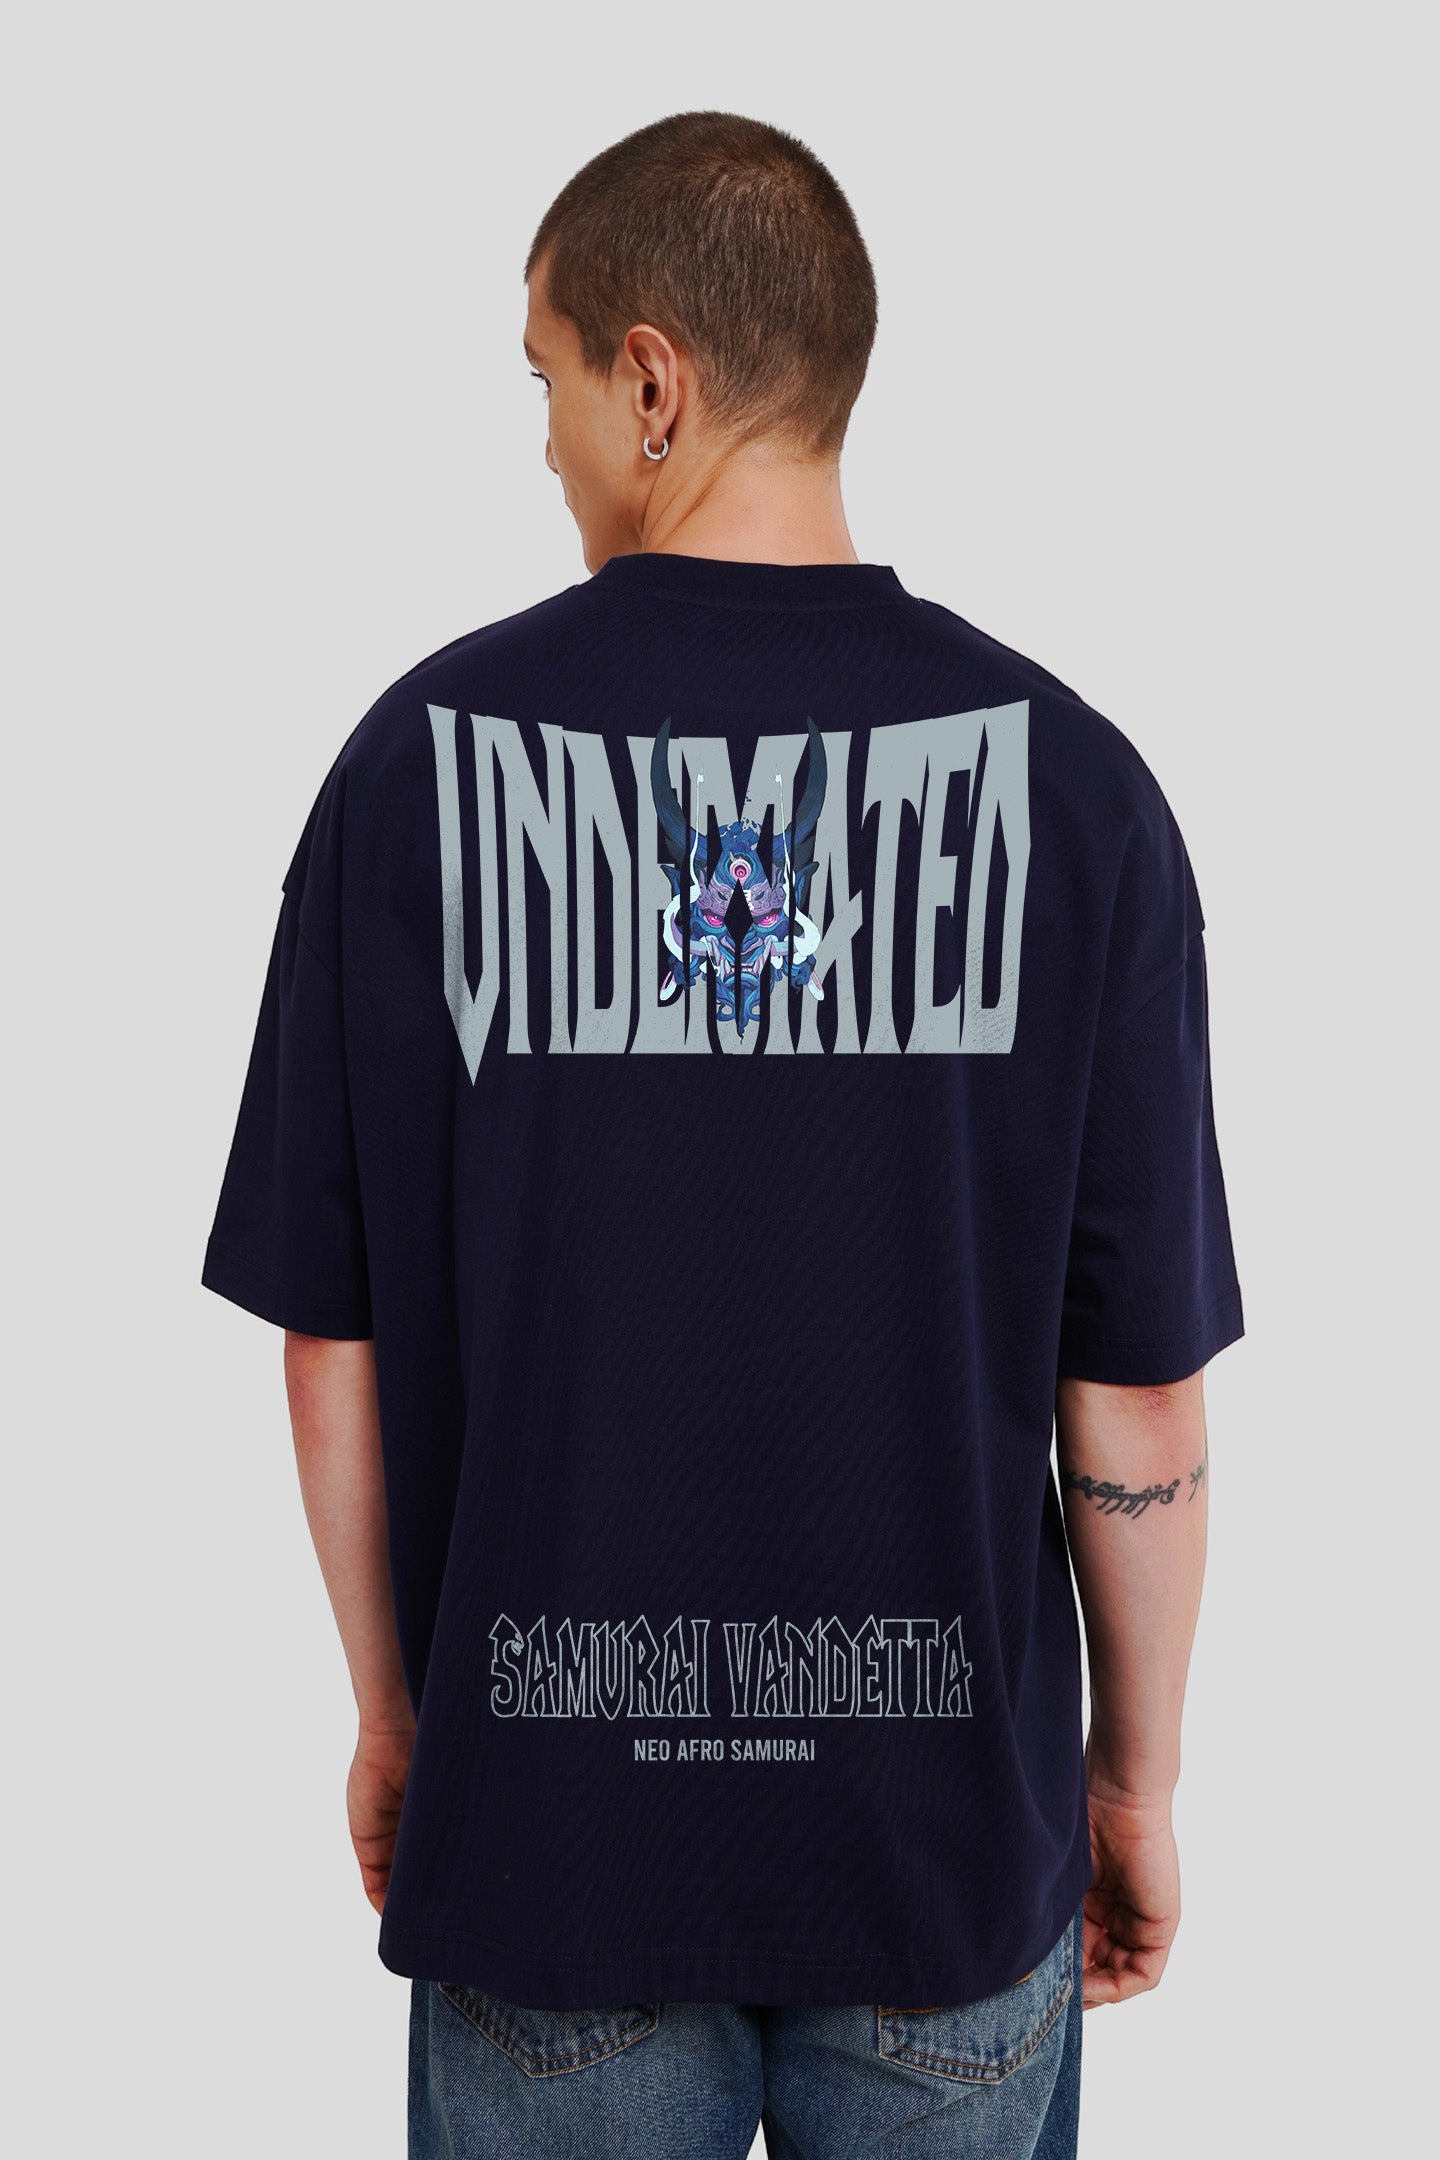 Samurai Vendetta Navy Blue Printed T Shirt Men Baggy Fit With Front And Back Design Pic 2